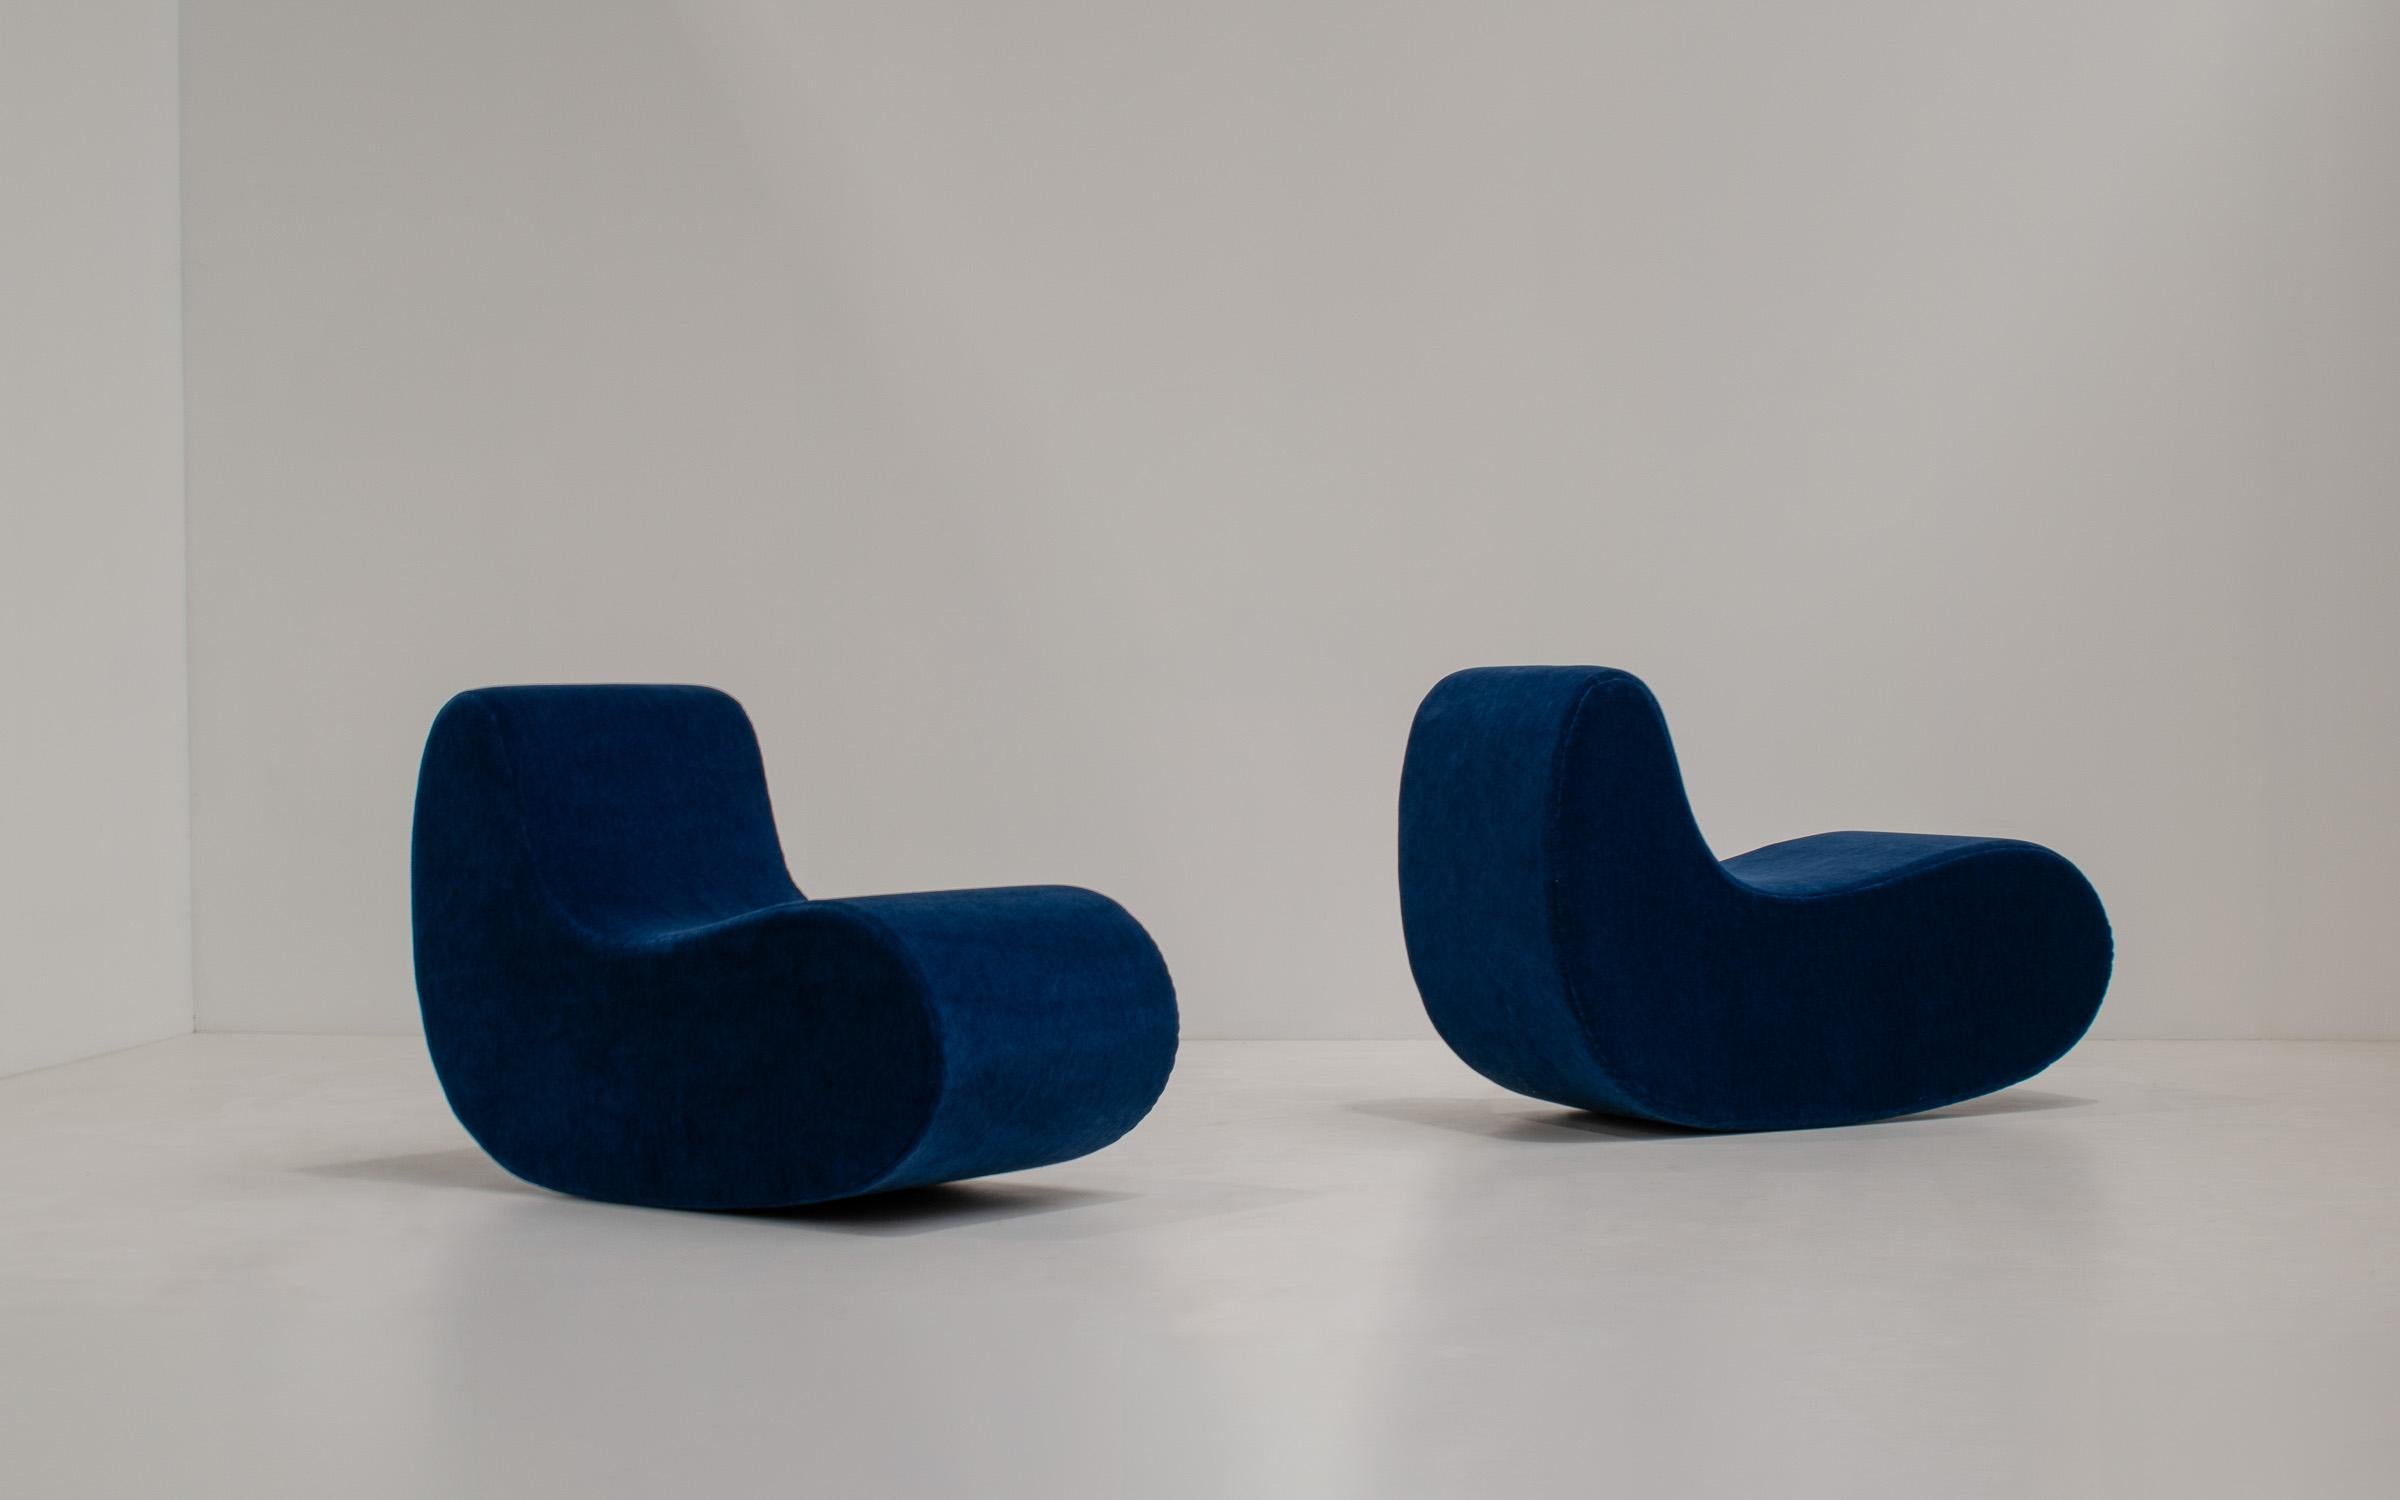 Pair of 'Sutra' Chairs by Gregorio Spini for Kundalini, sourced in the north of Italy.

These Sutra lounge chairs are the perfect blend between midcentury-modern sophistication and space-age chic. They aren't just seats; they're works of art, a nod